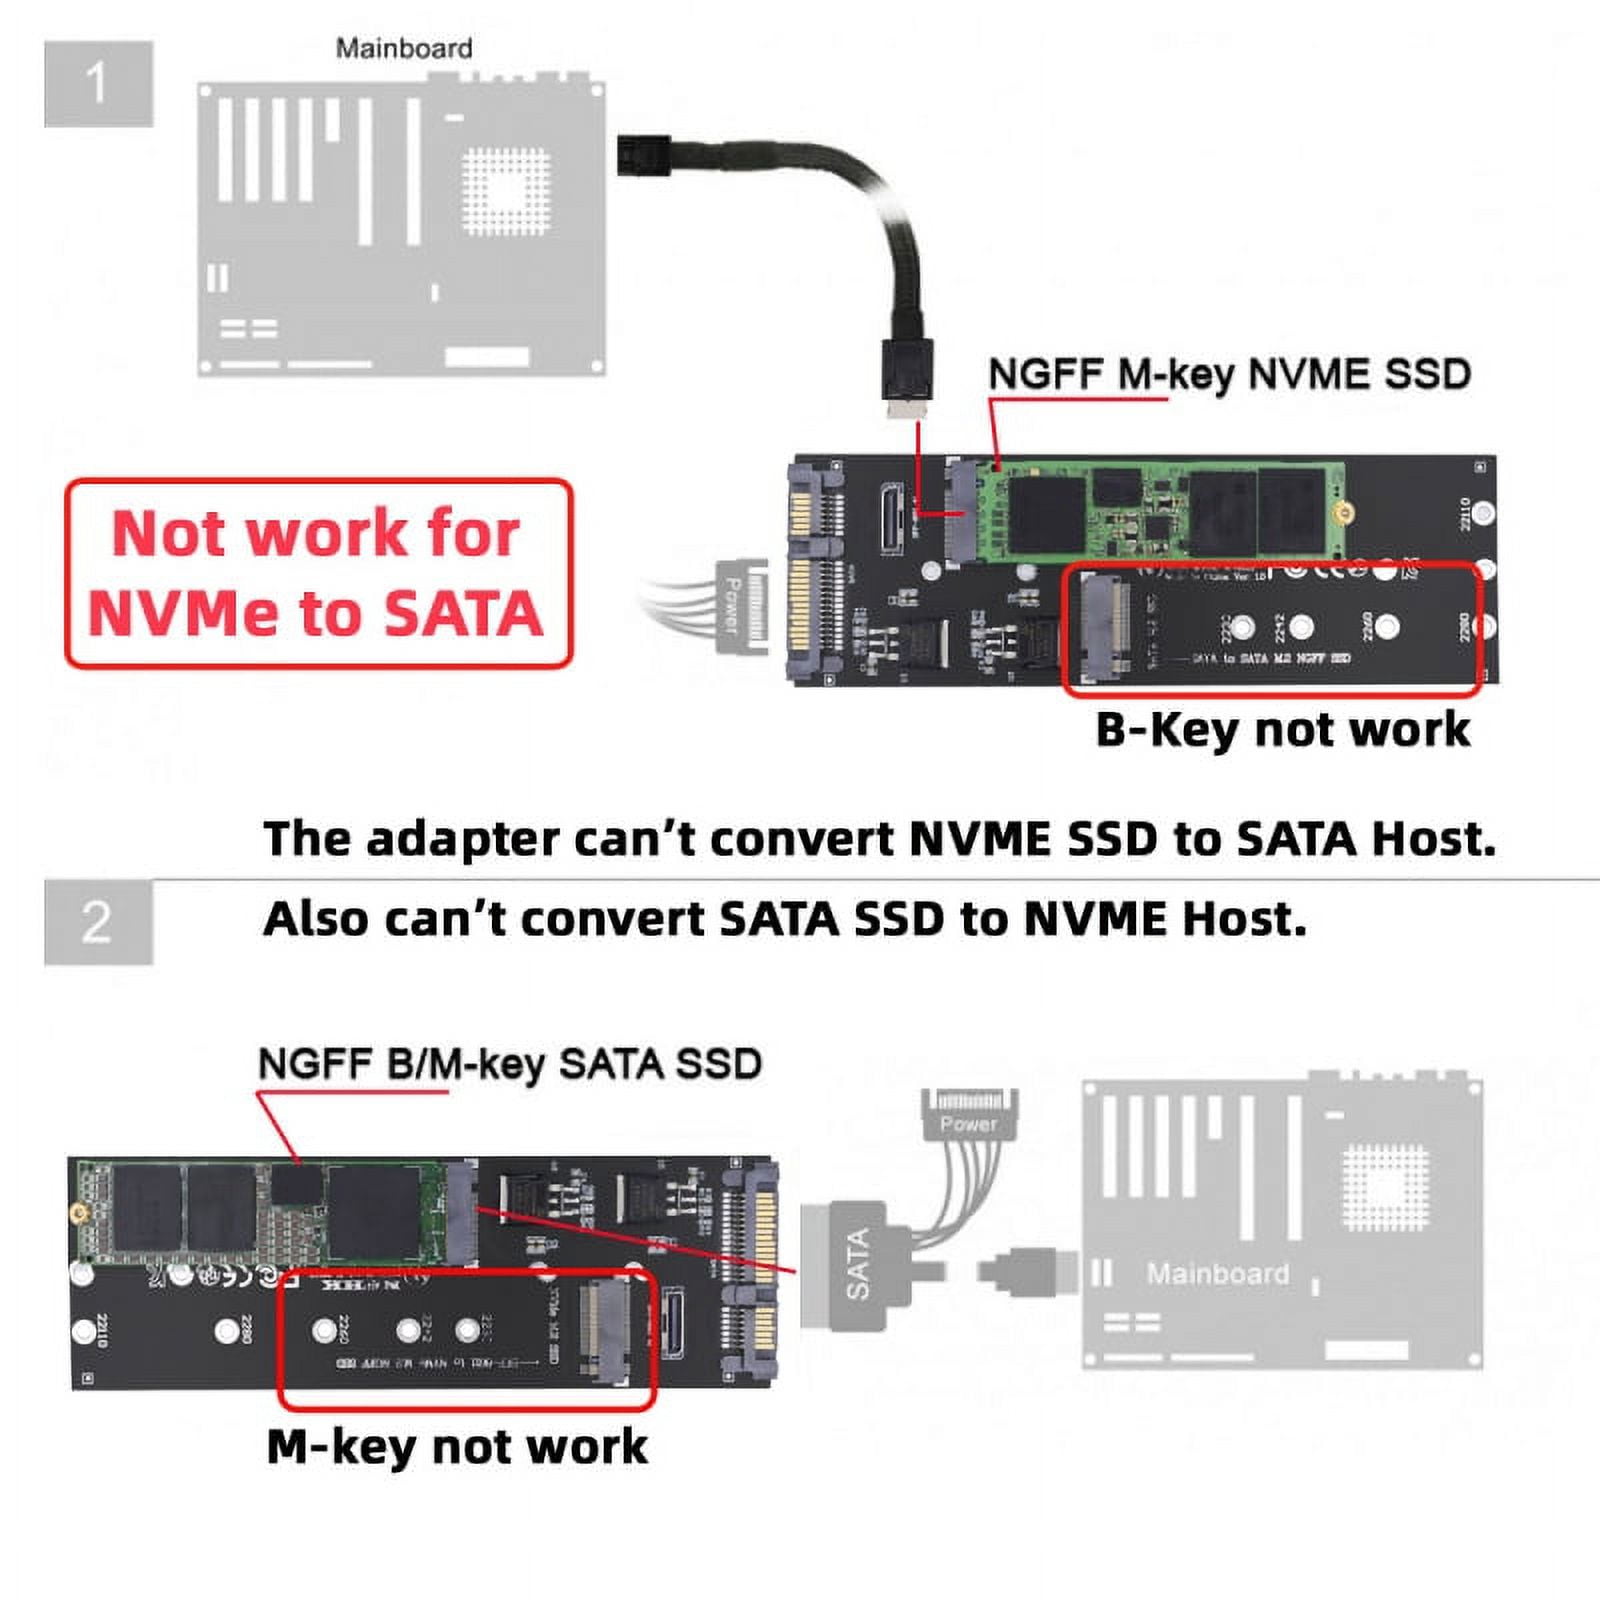 JSER Oculink SFF-8612 8611 to U.2 Kit M-Key to NVME PCIe SSD and NGFF to  SATA Adapter for Mainboard